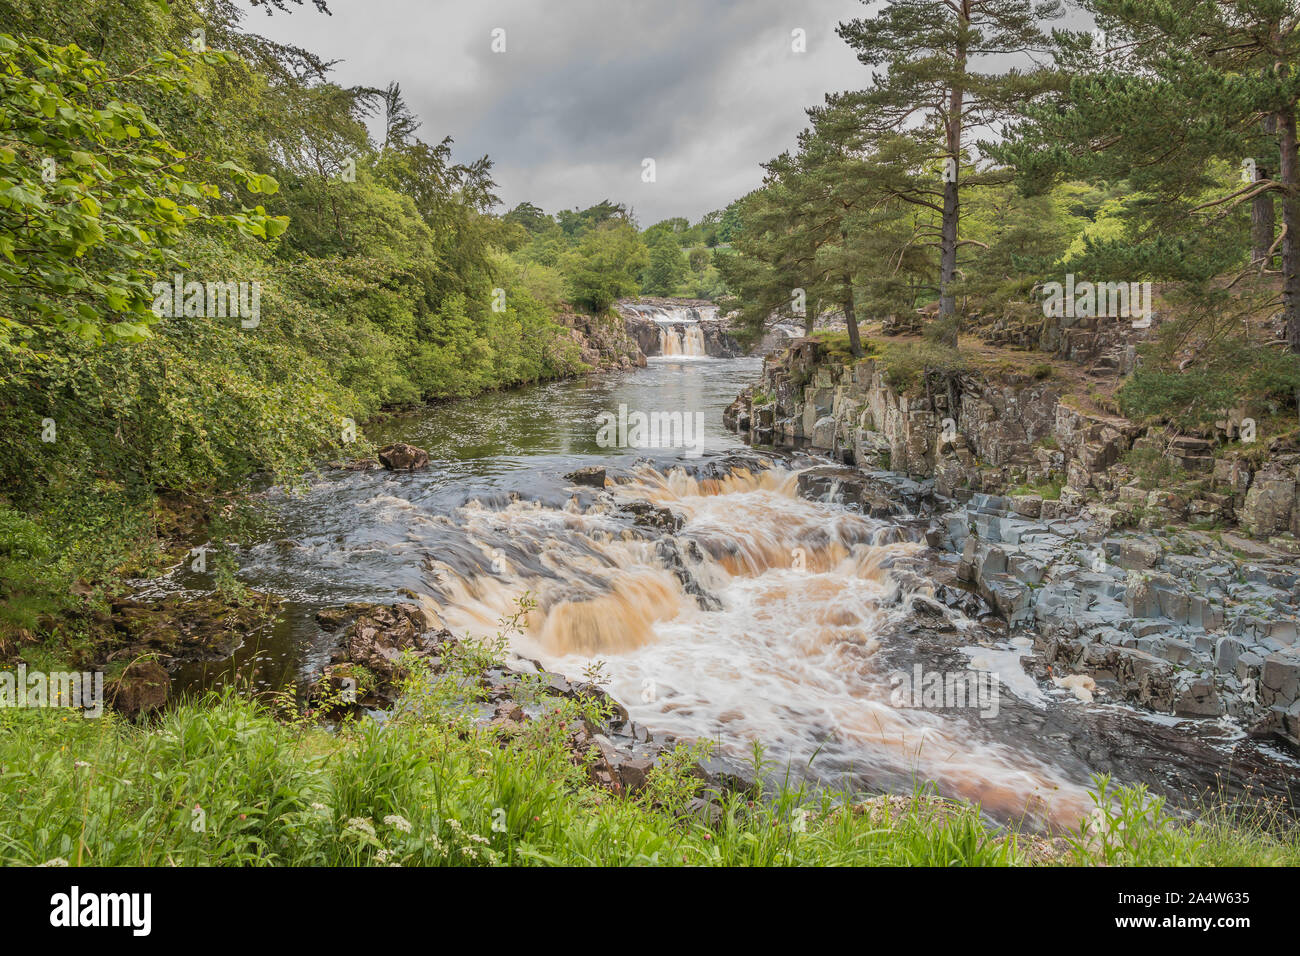 Summer Solstice 2019 at Low Force Waterfall, Upper Teesdale, UK Stock Photo